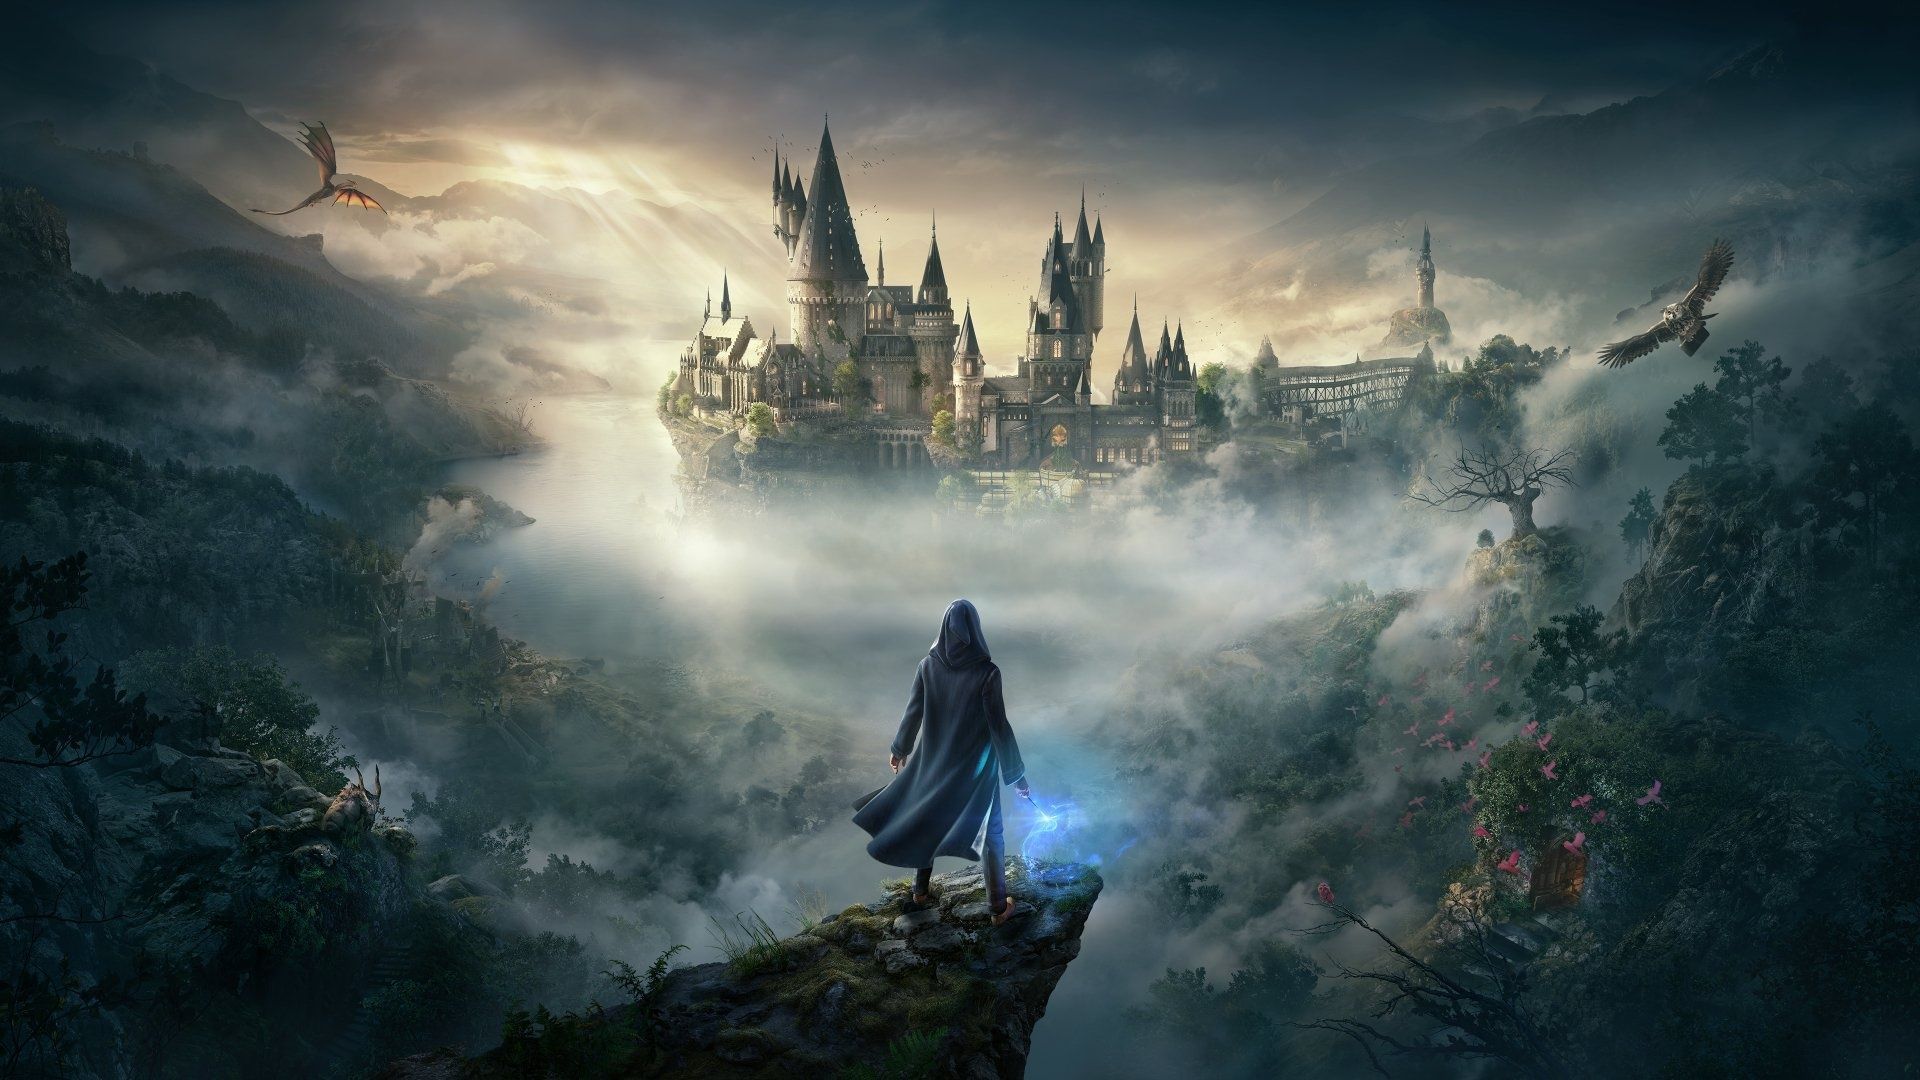 A character from Hogwarts Legacy stands on a cliff with Hogwarts castle in the background - Castle, Hogwarts